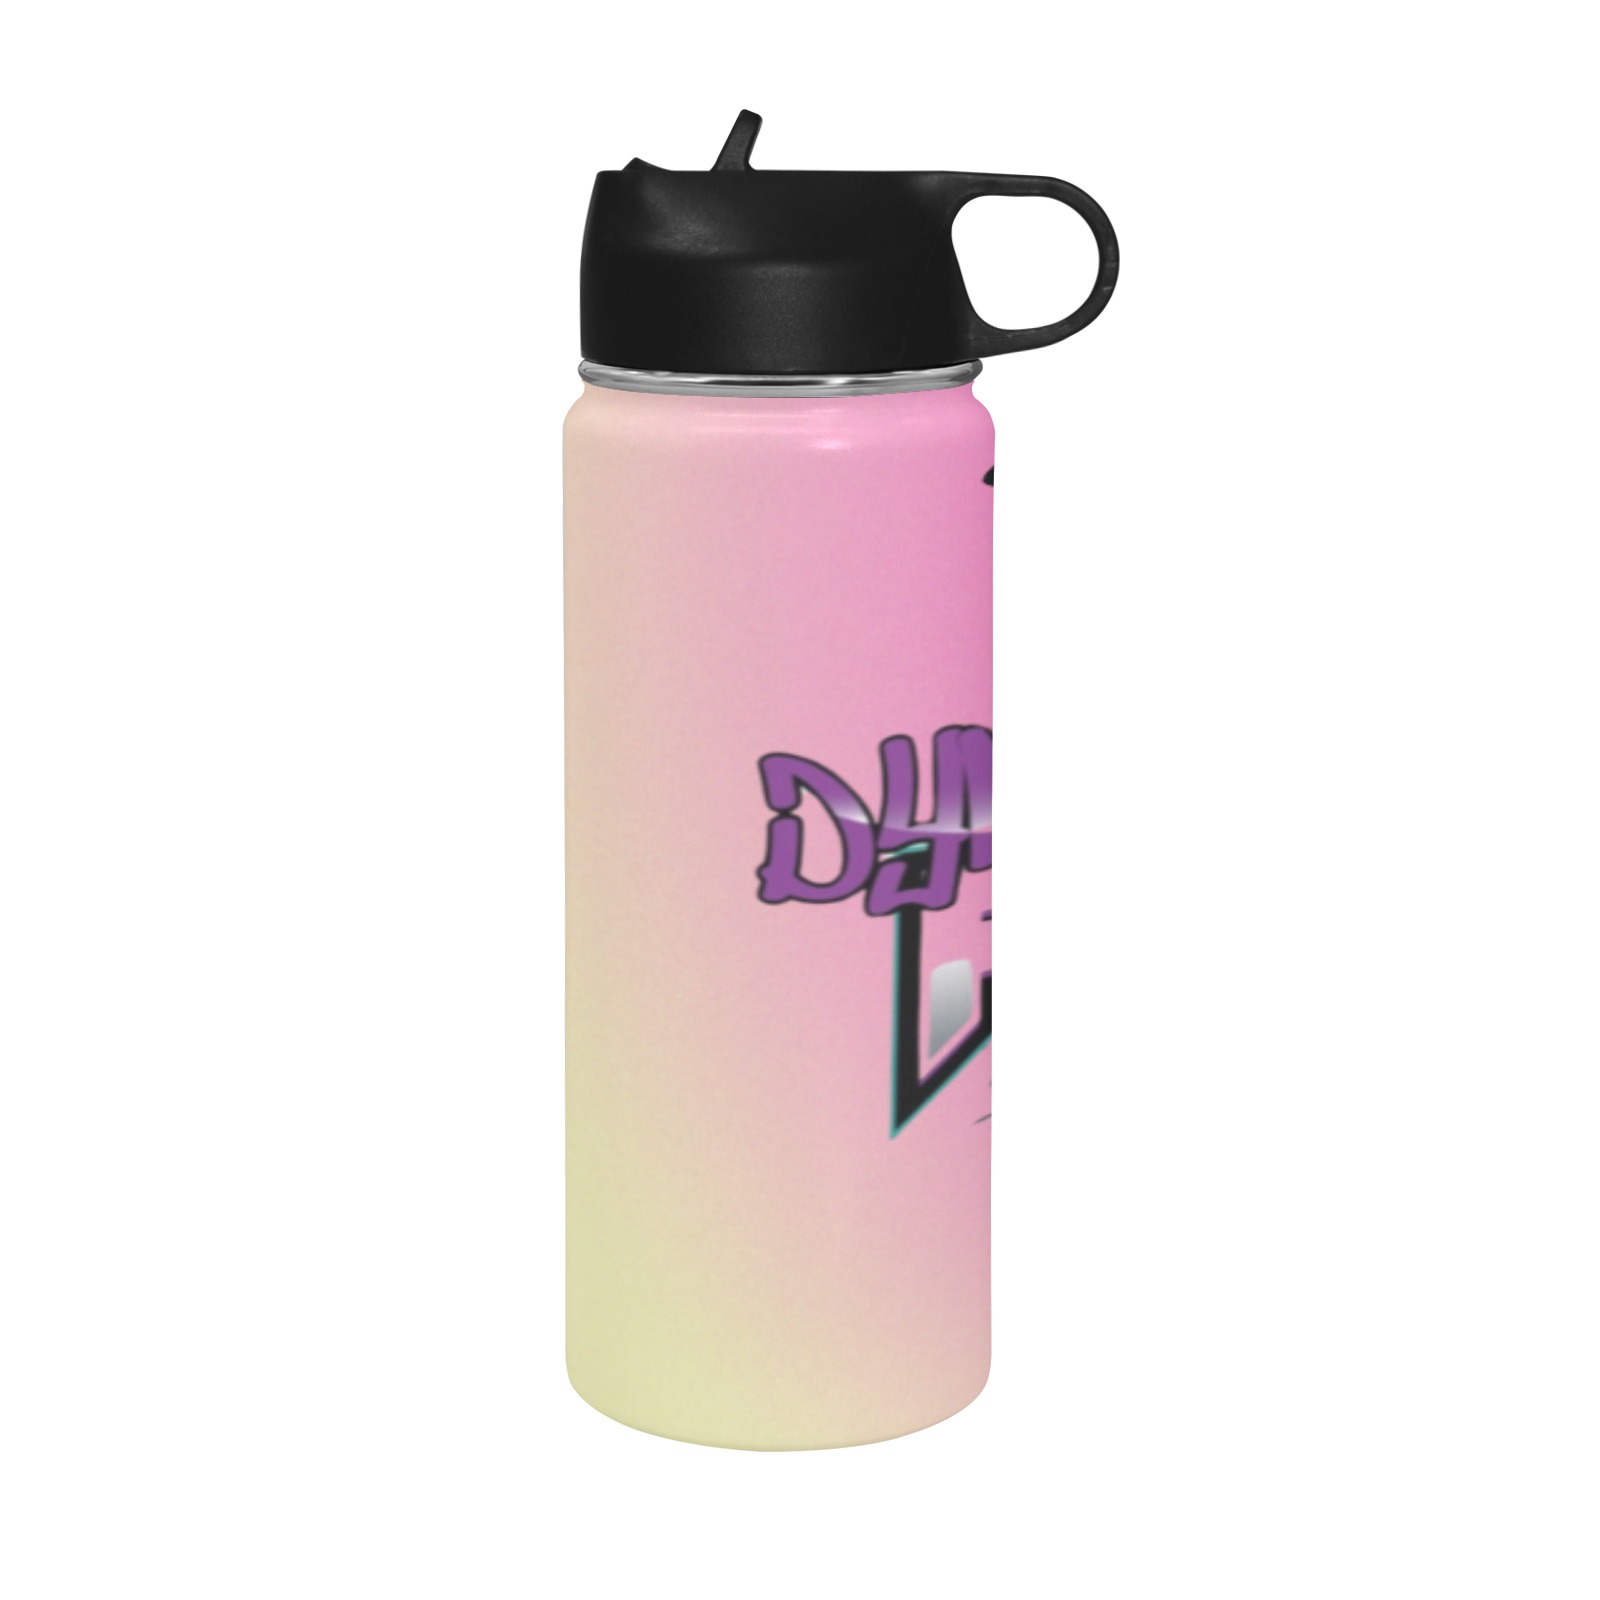 dfdc name cup Insulated Water Bottle with Straw Lid (18 oz)